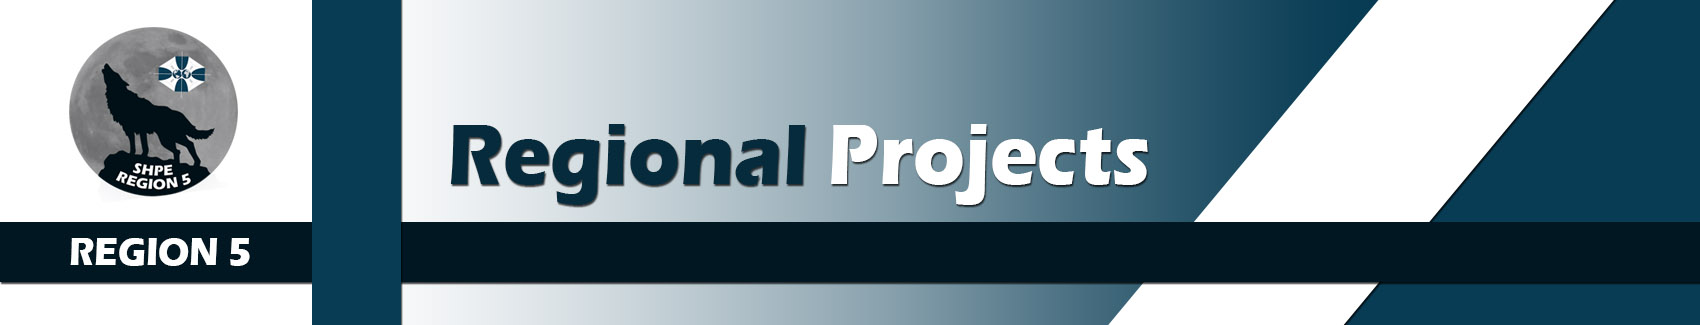 regional projects